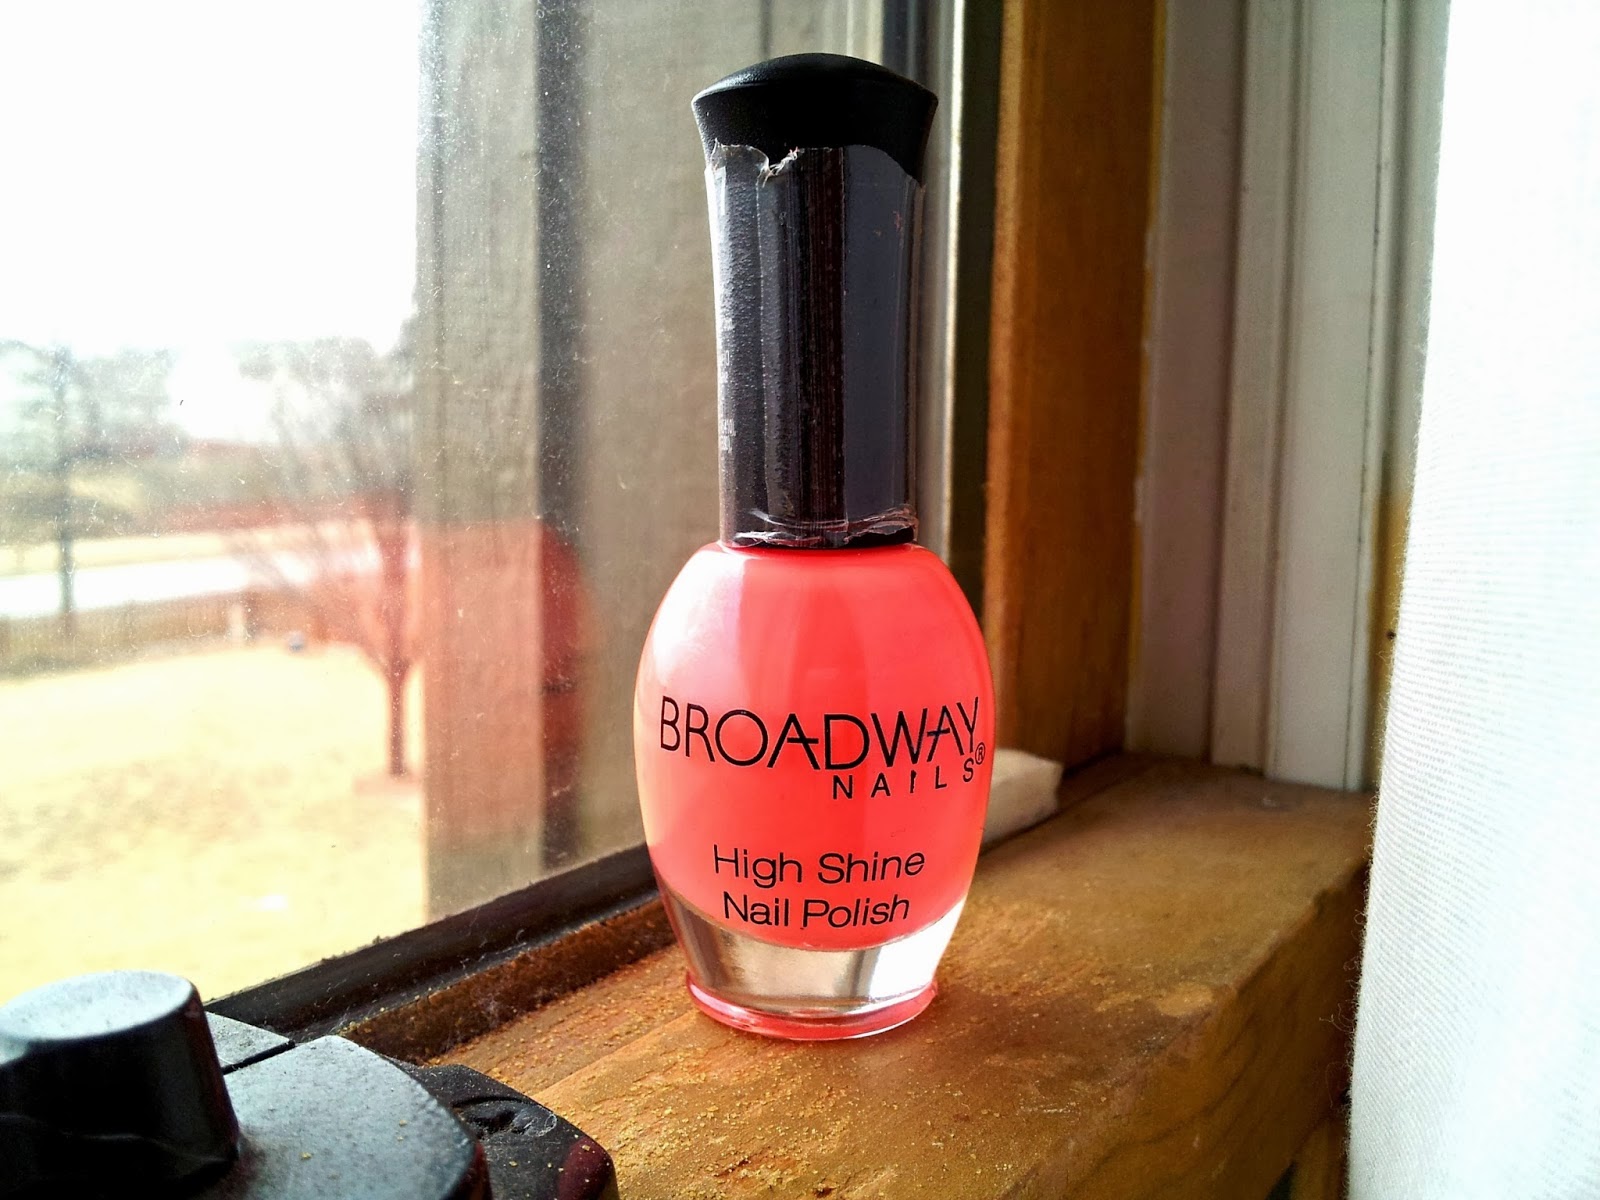 4. Broadway Nails Matte Finish Nail Polish in Color 40 - wide 1